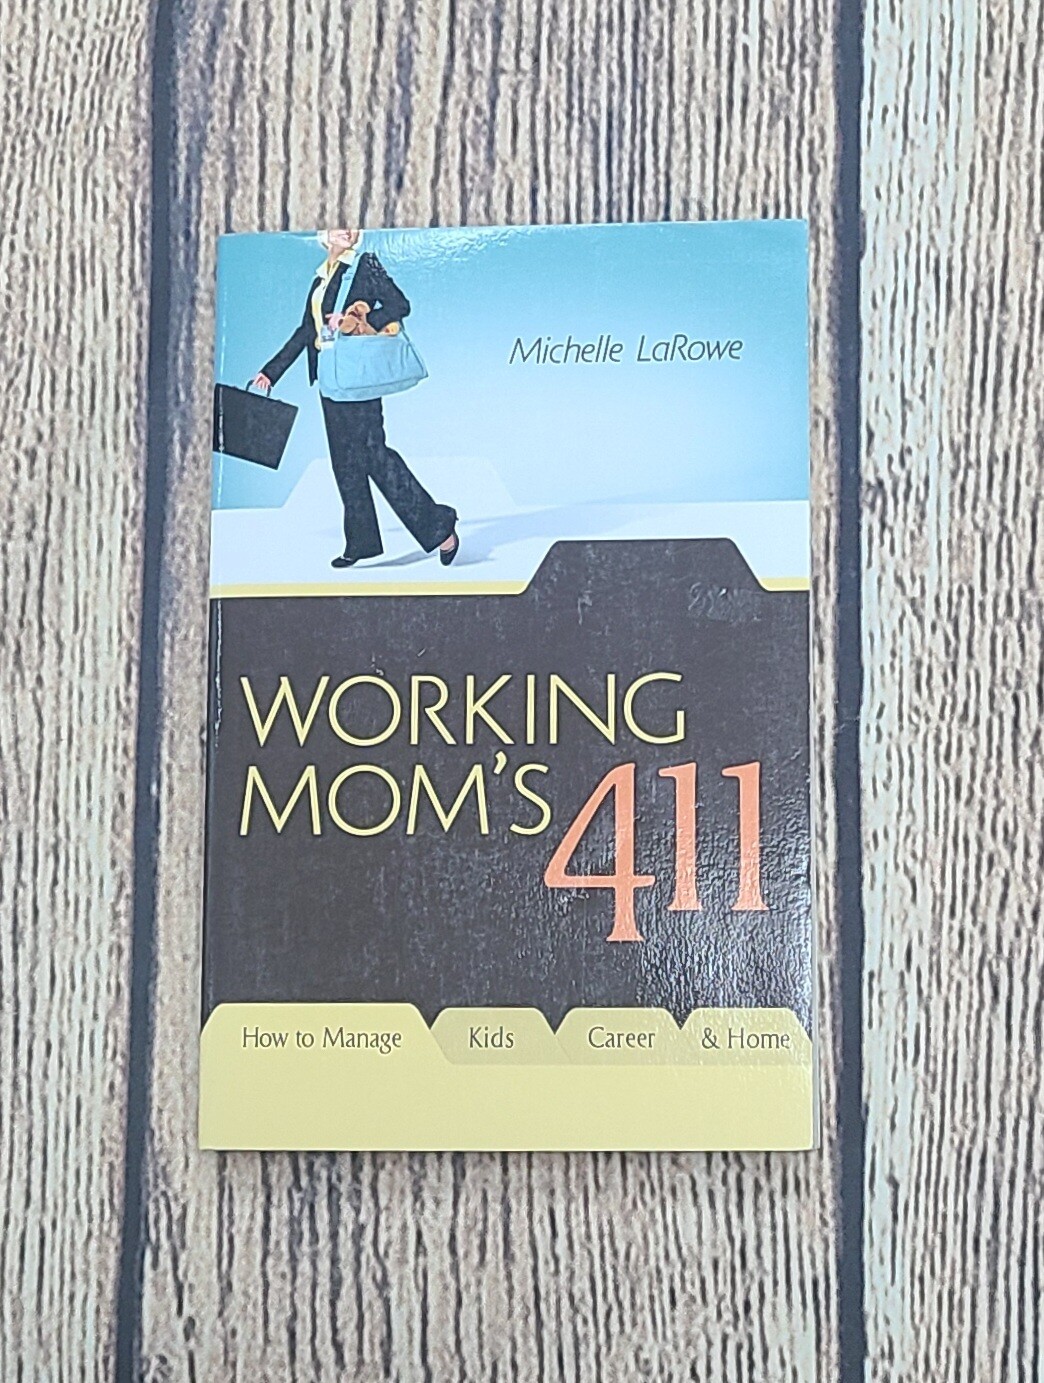 Working Mom's 411 by Michelle LaRowe